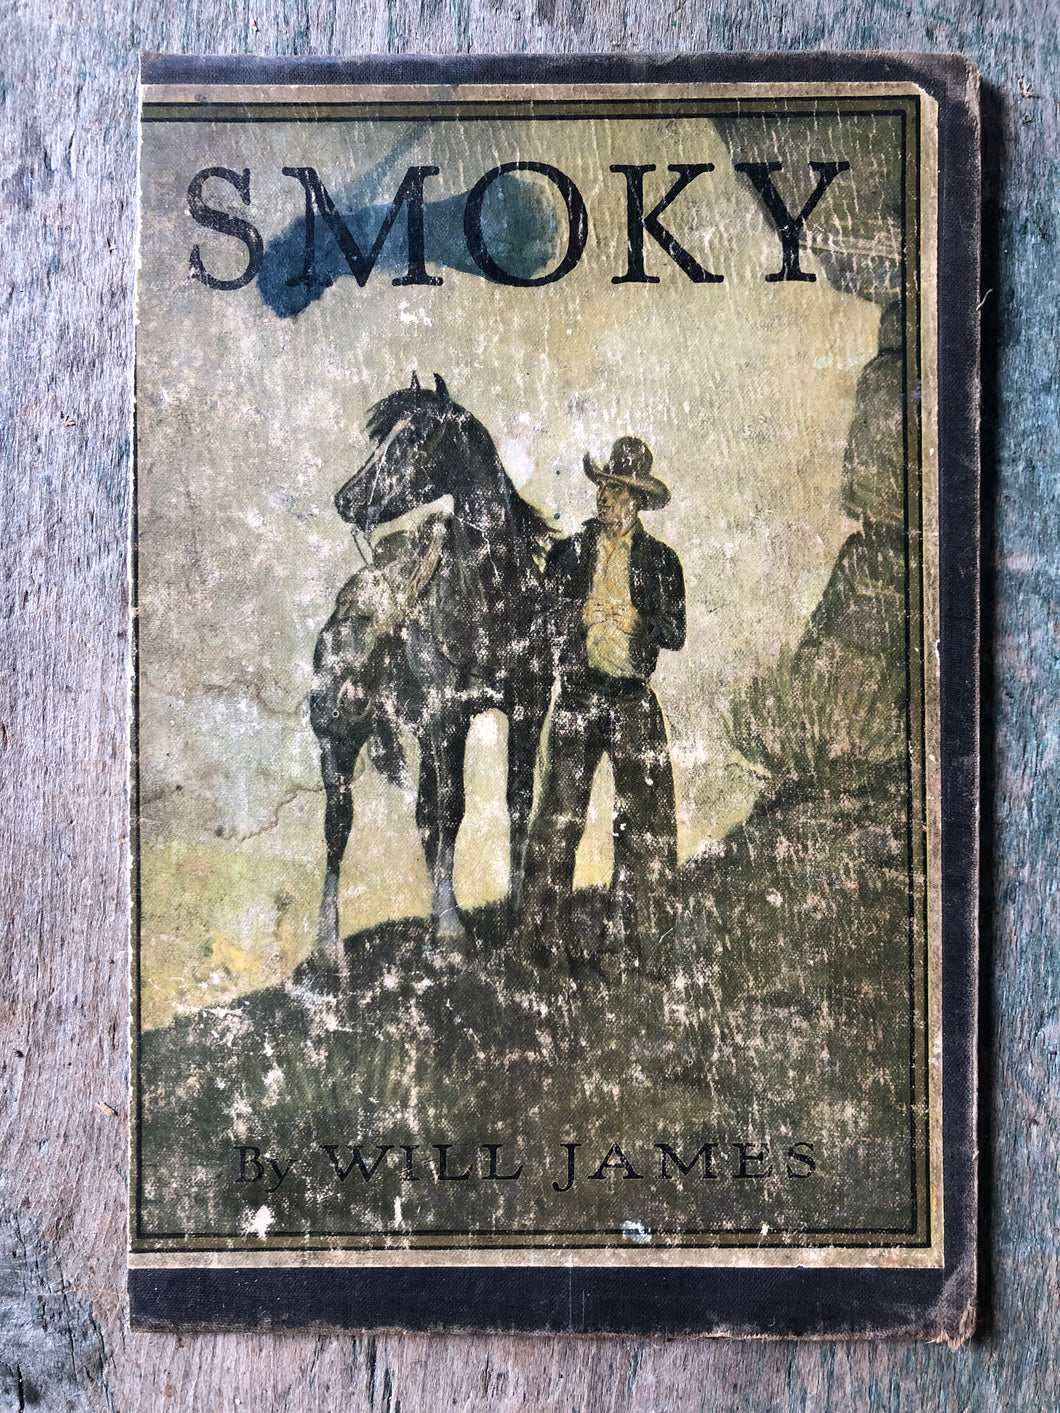 Cover of “Smoky”